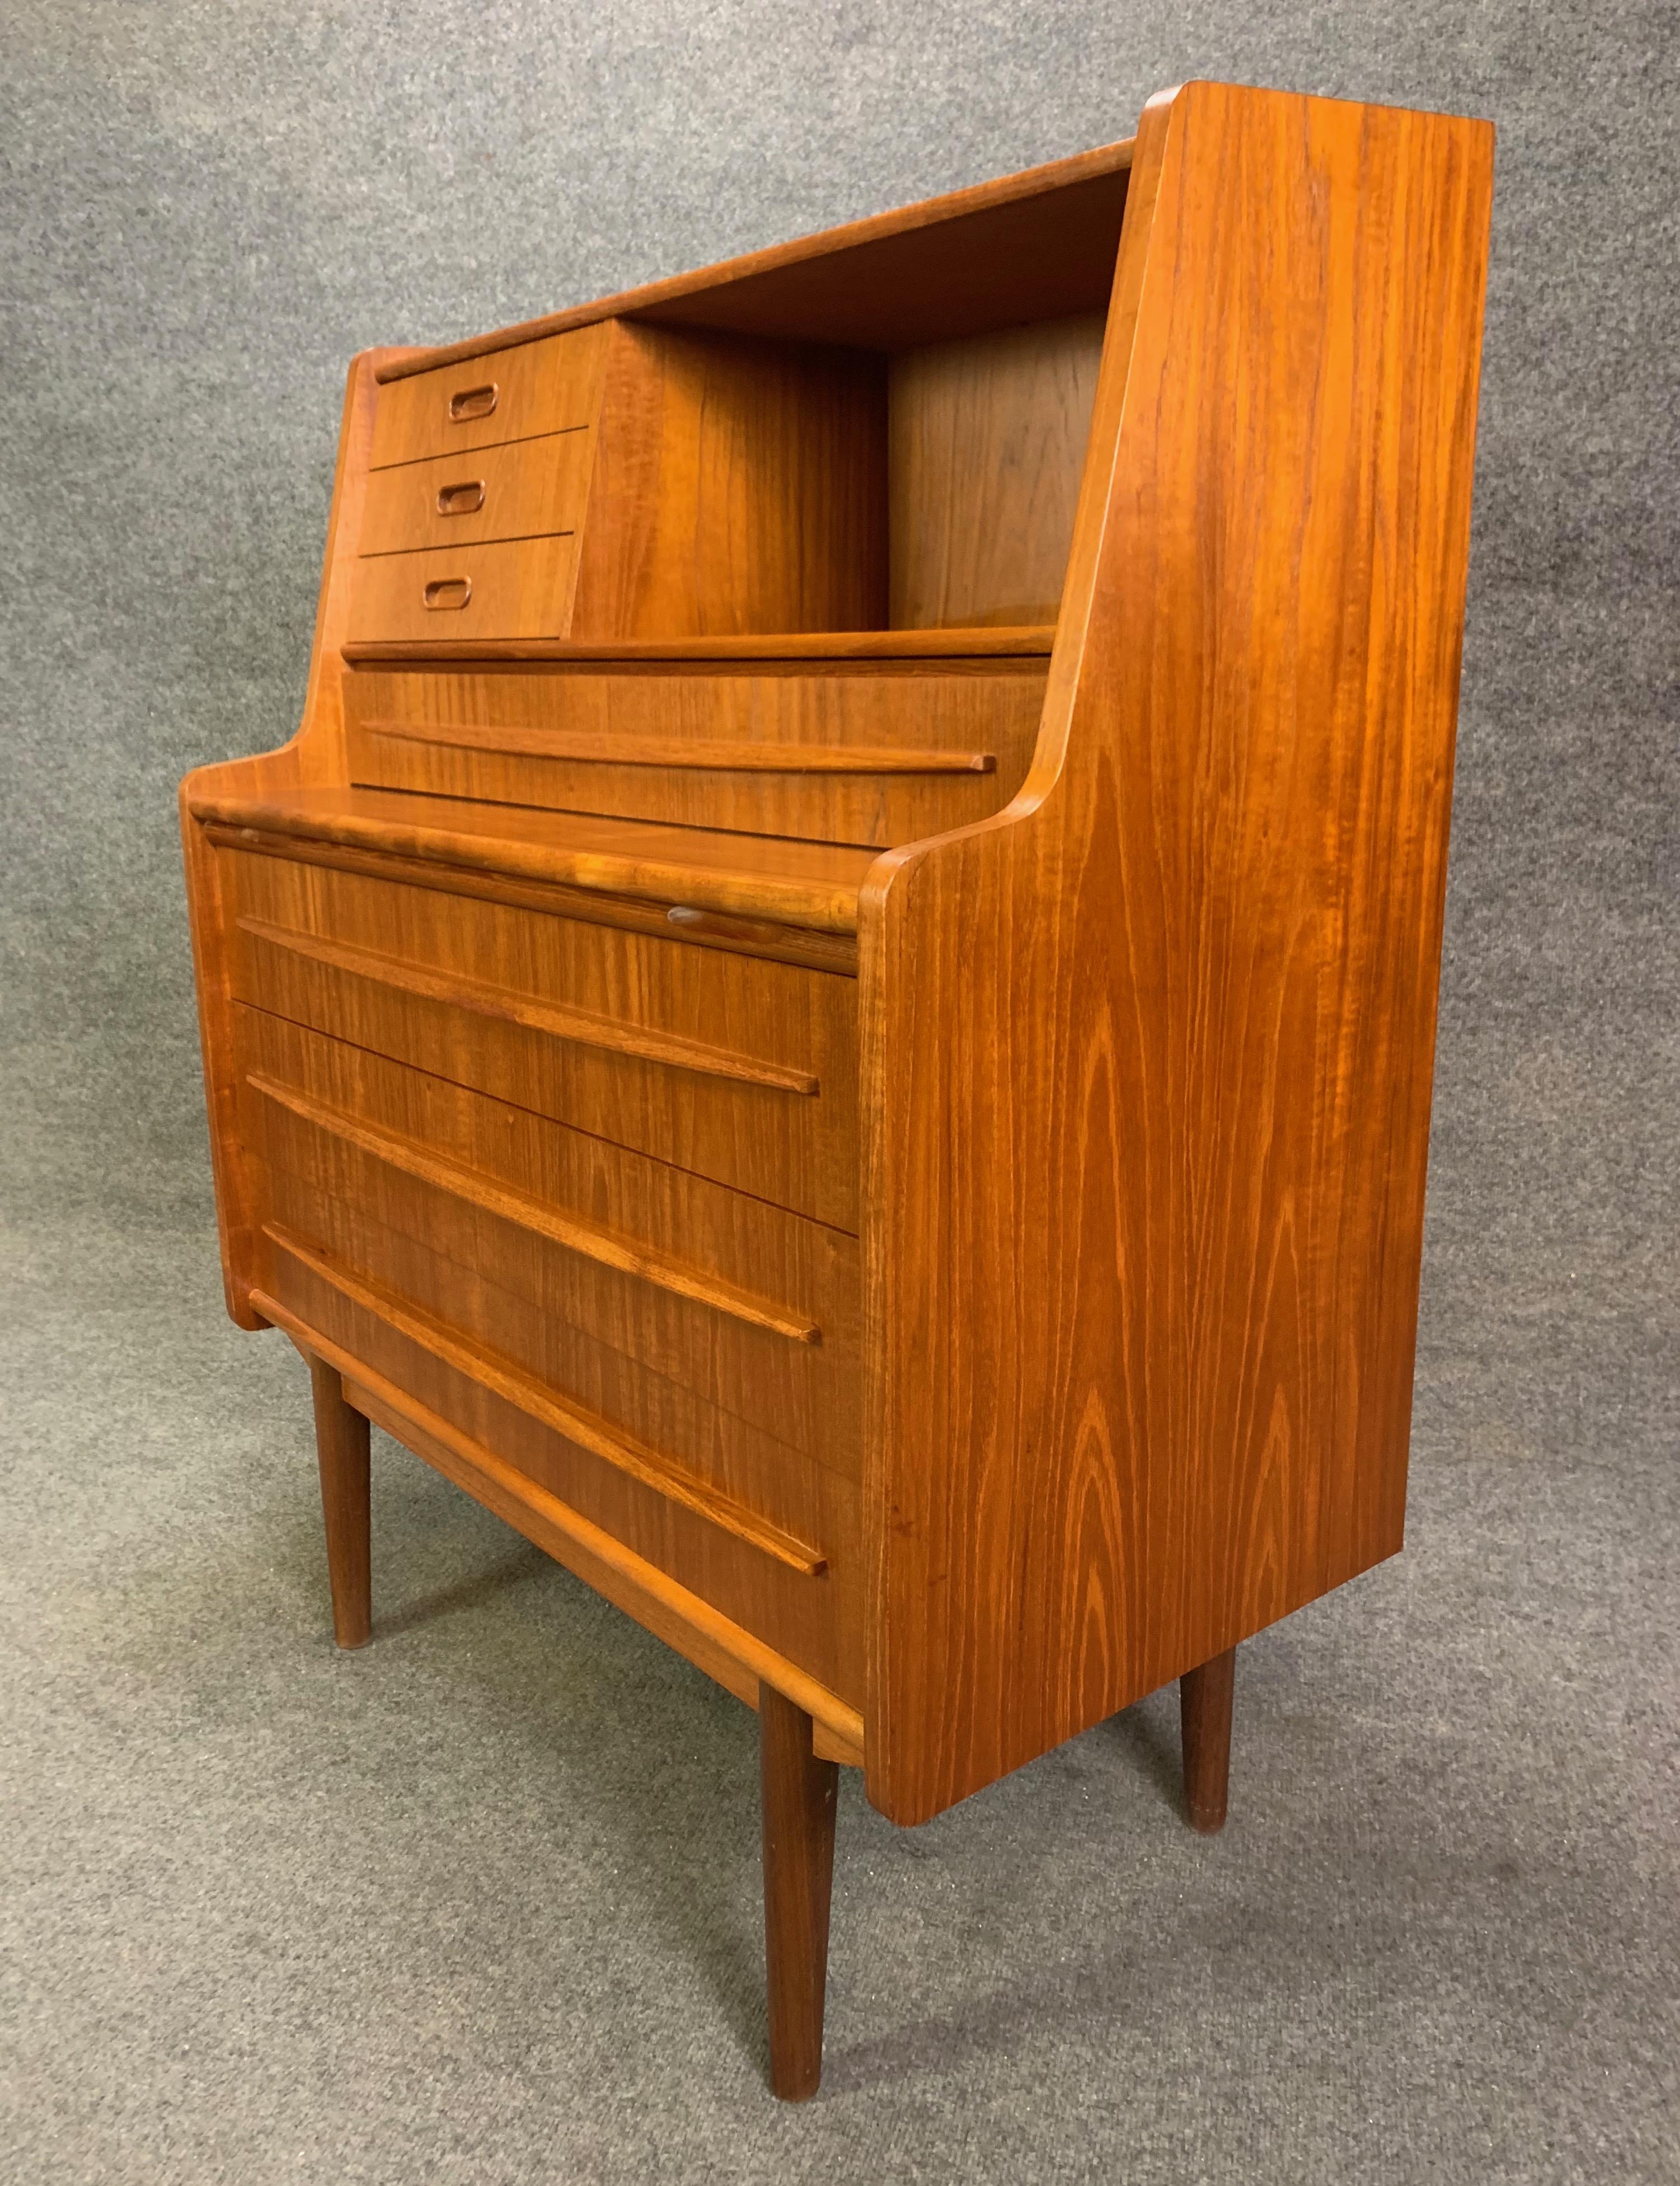 Here is a beautiful Scandinavian secretary desk in teak manufactured by Gunnar Falsigs in Denmark in the 1960s. This exquisite piece, recently imported from Copenhagen to California, features a vibrant wood grain with many storage options: On its